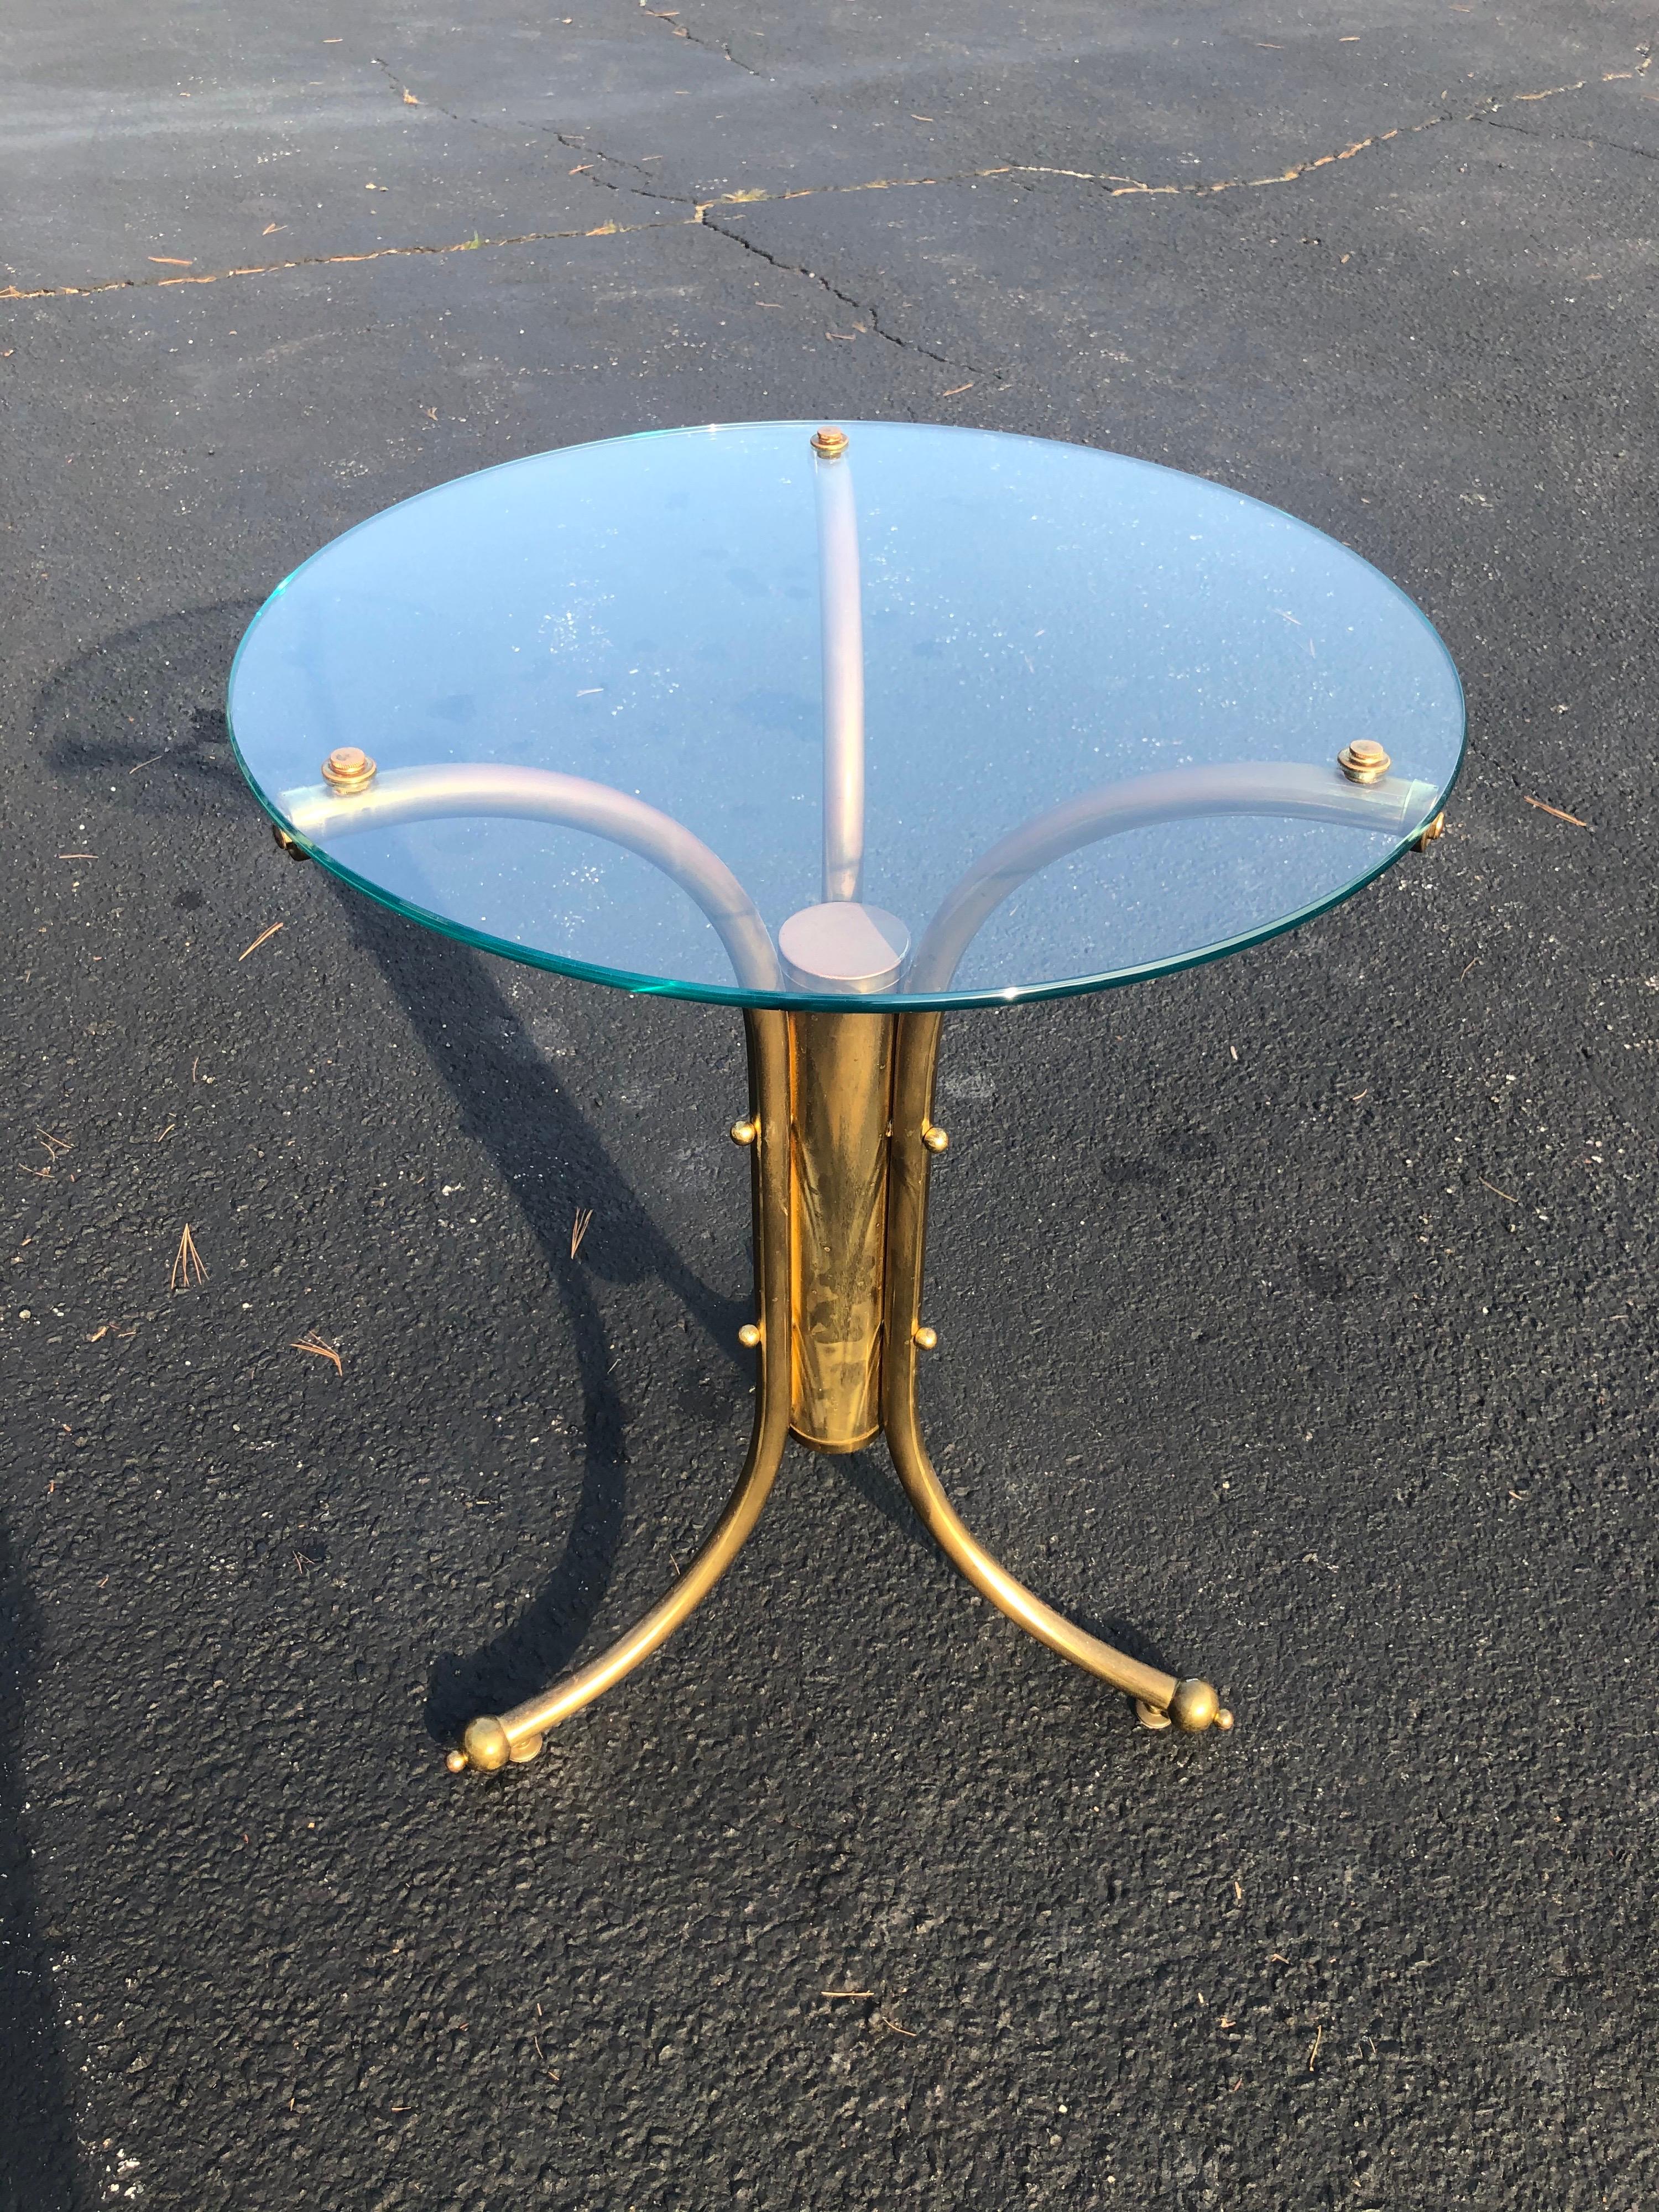 Midcentury brass and glass bistro table. Just add two chairs. Classic round glass top with elegant tripod base. Can be used to dine at or as a plant stand. 1970s in the style of Karl Springer. Please confirm the dimensions prior to purchase. This